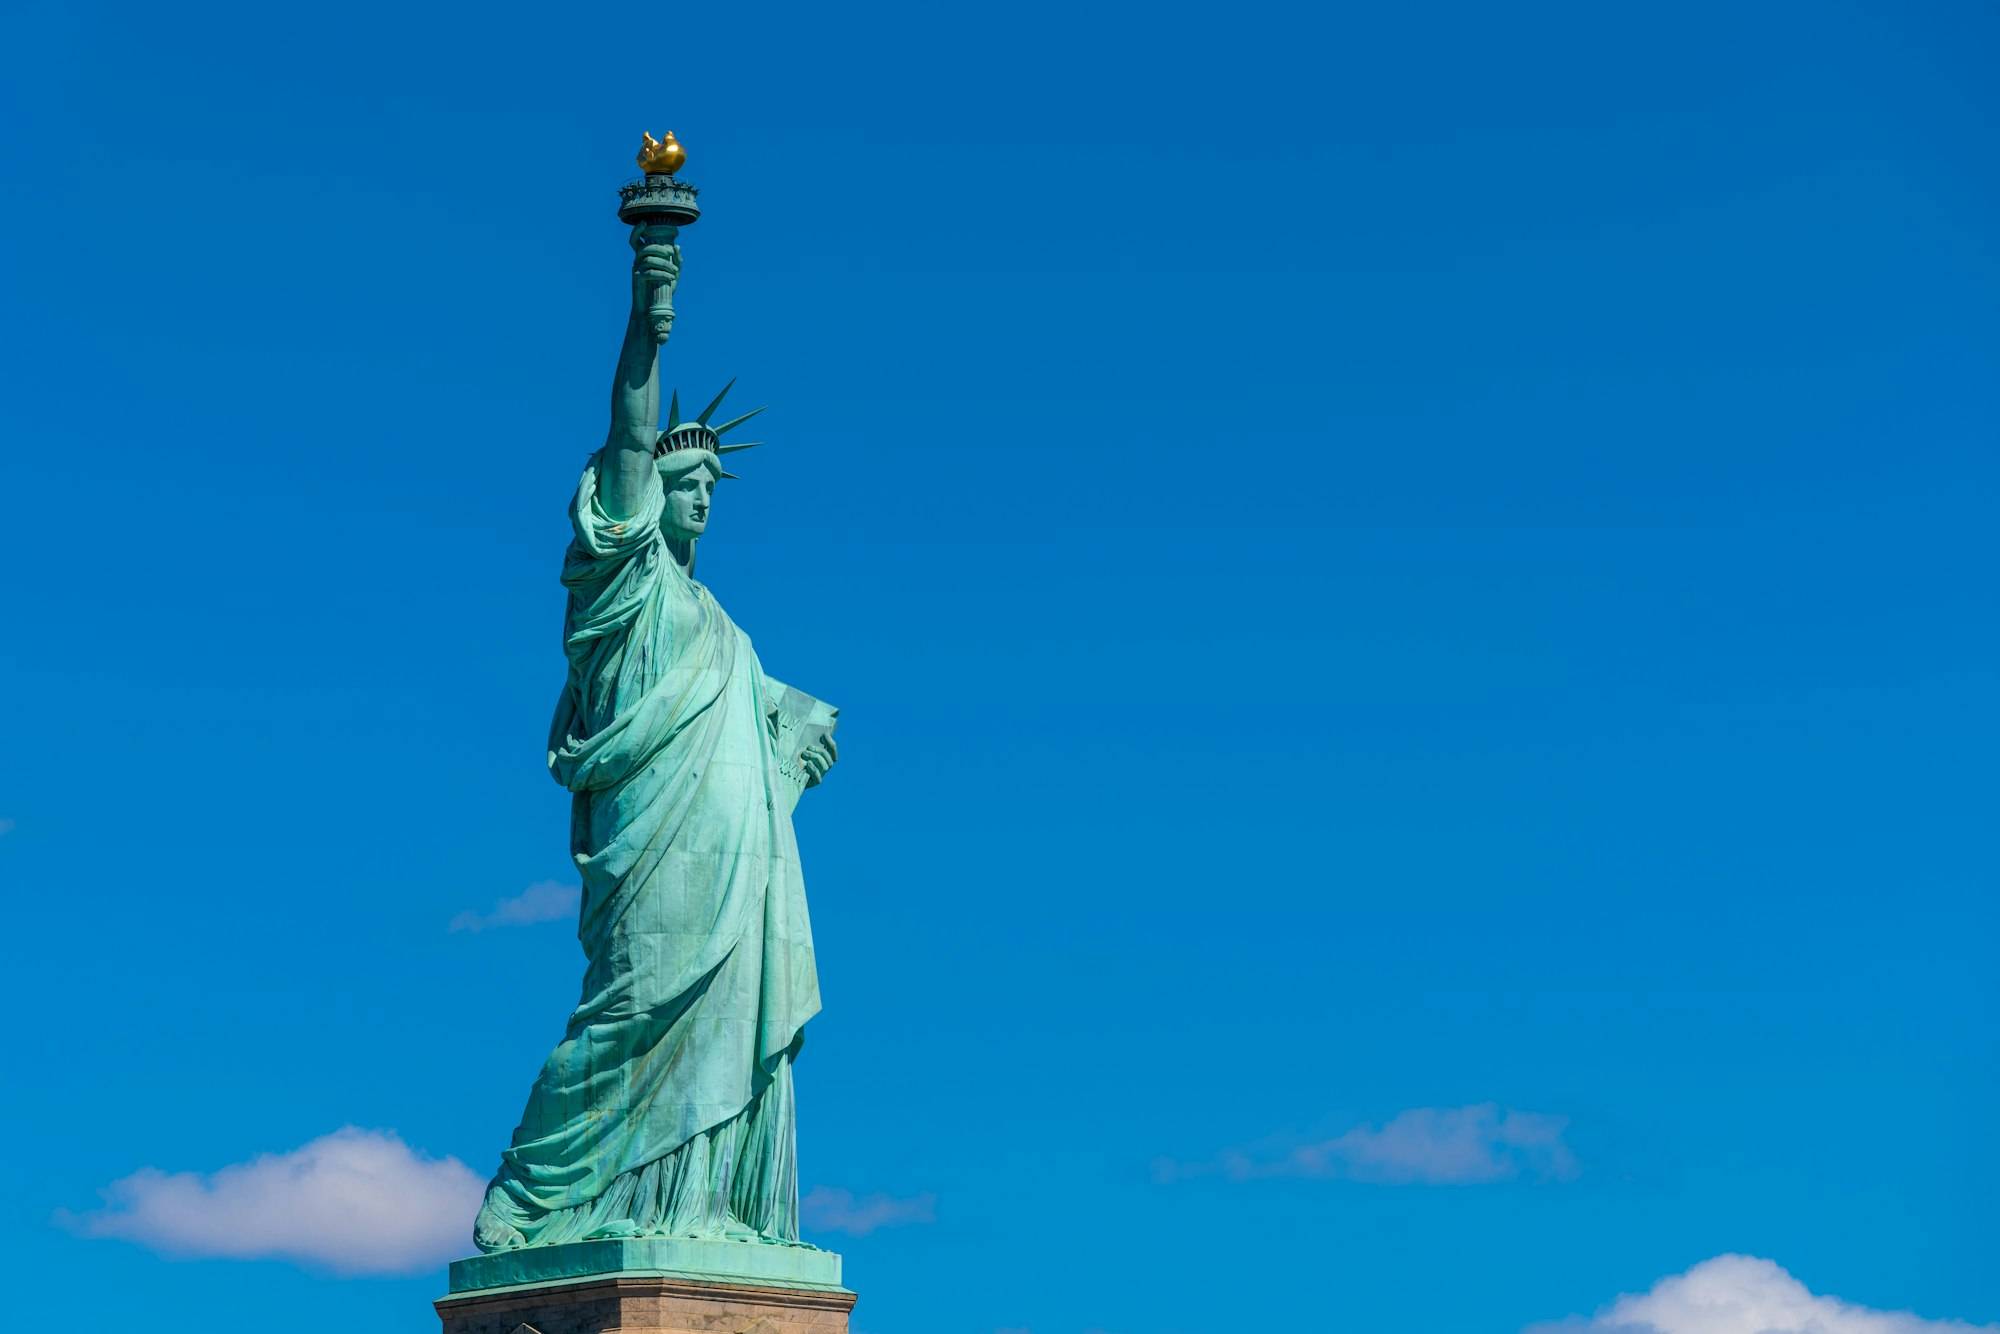 The Statue of Liberty under the blue sky background, Lower Manhattan, New York City,